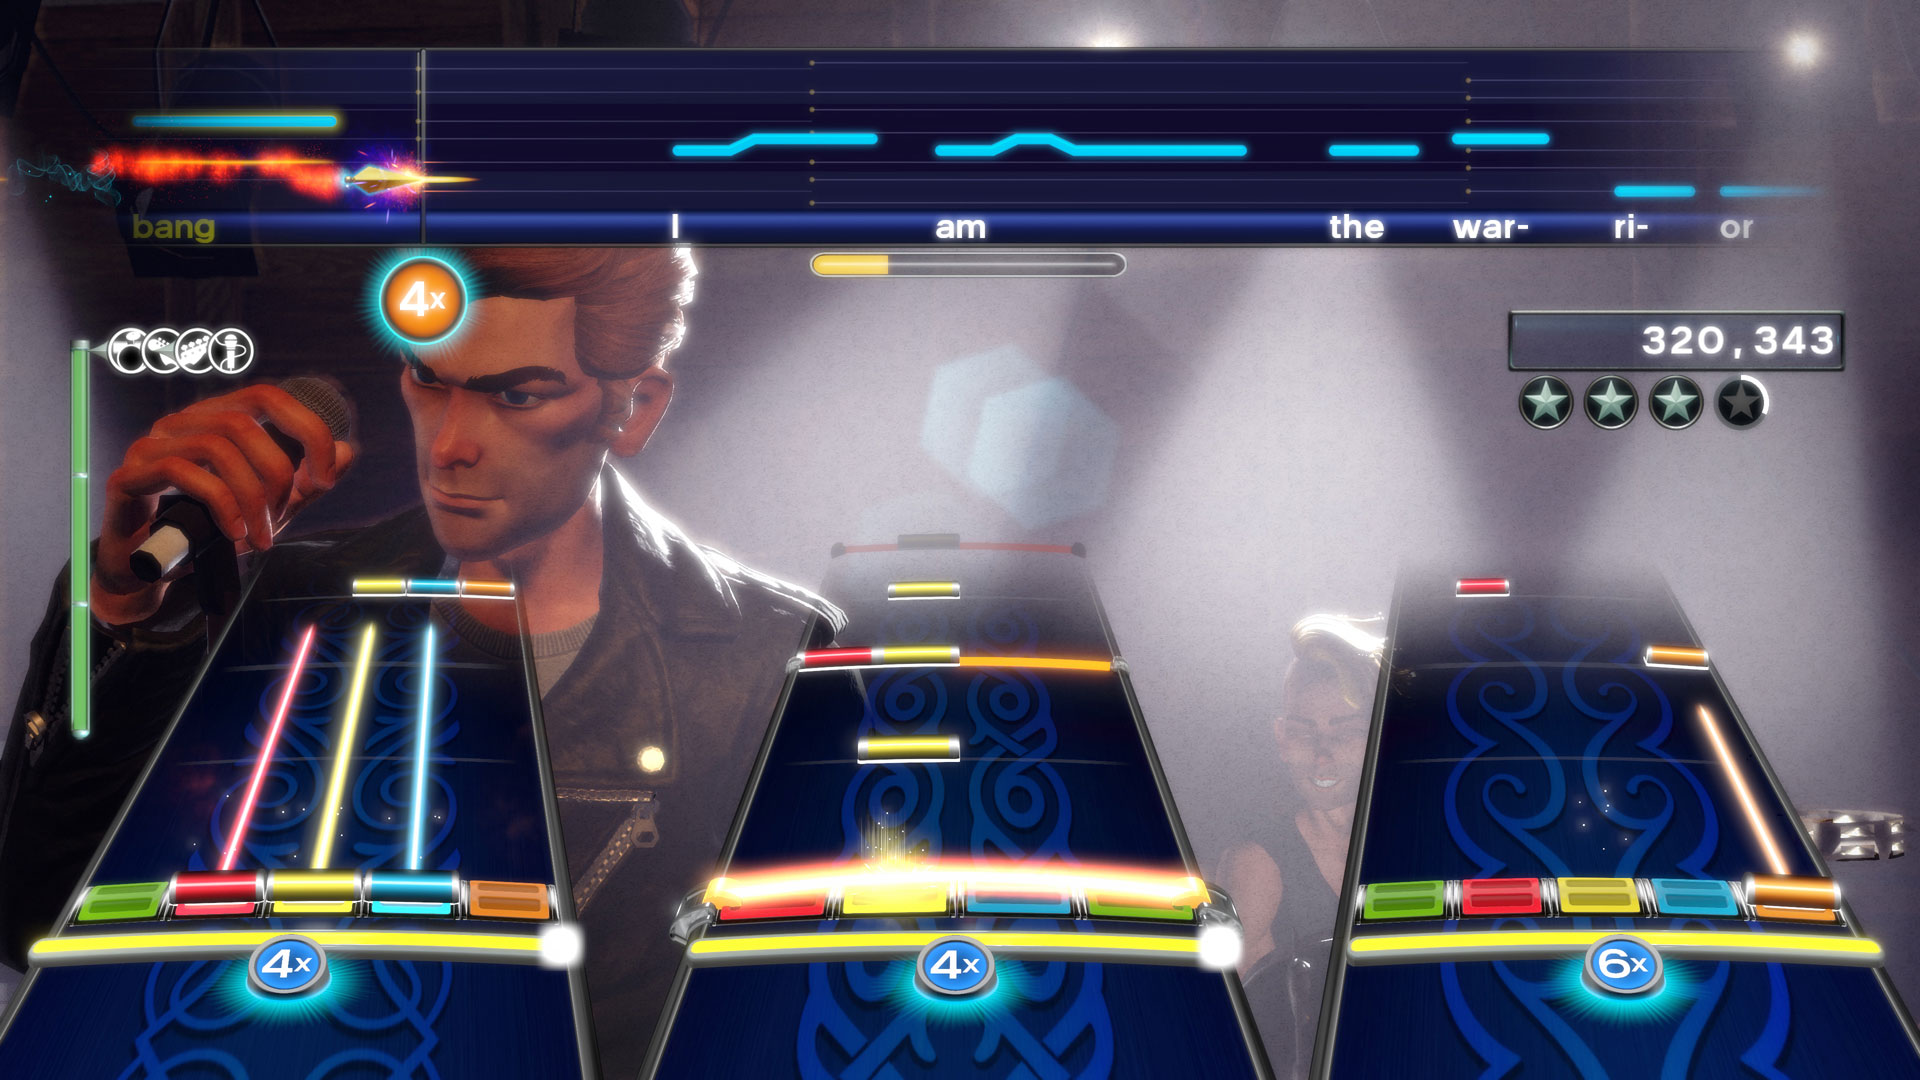 Rock Band 4 Preorders Begin, Time To Hunt For Old Instruments